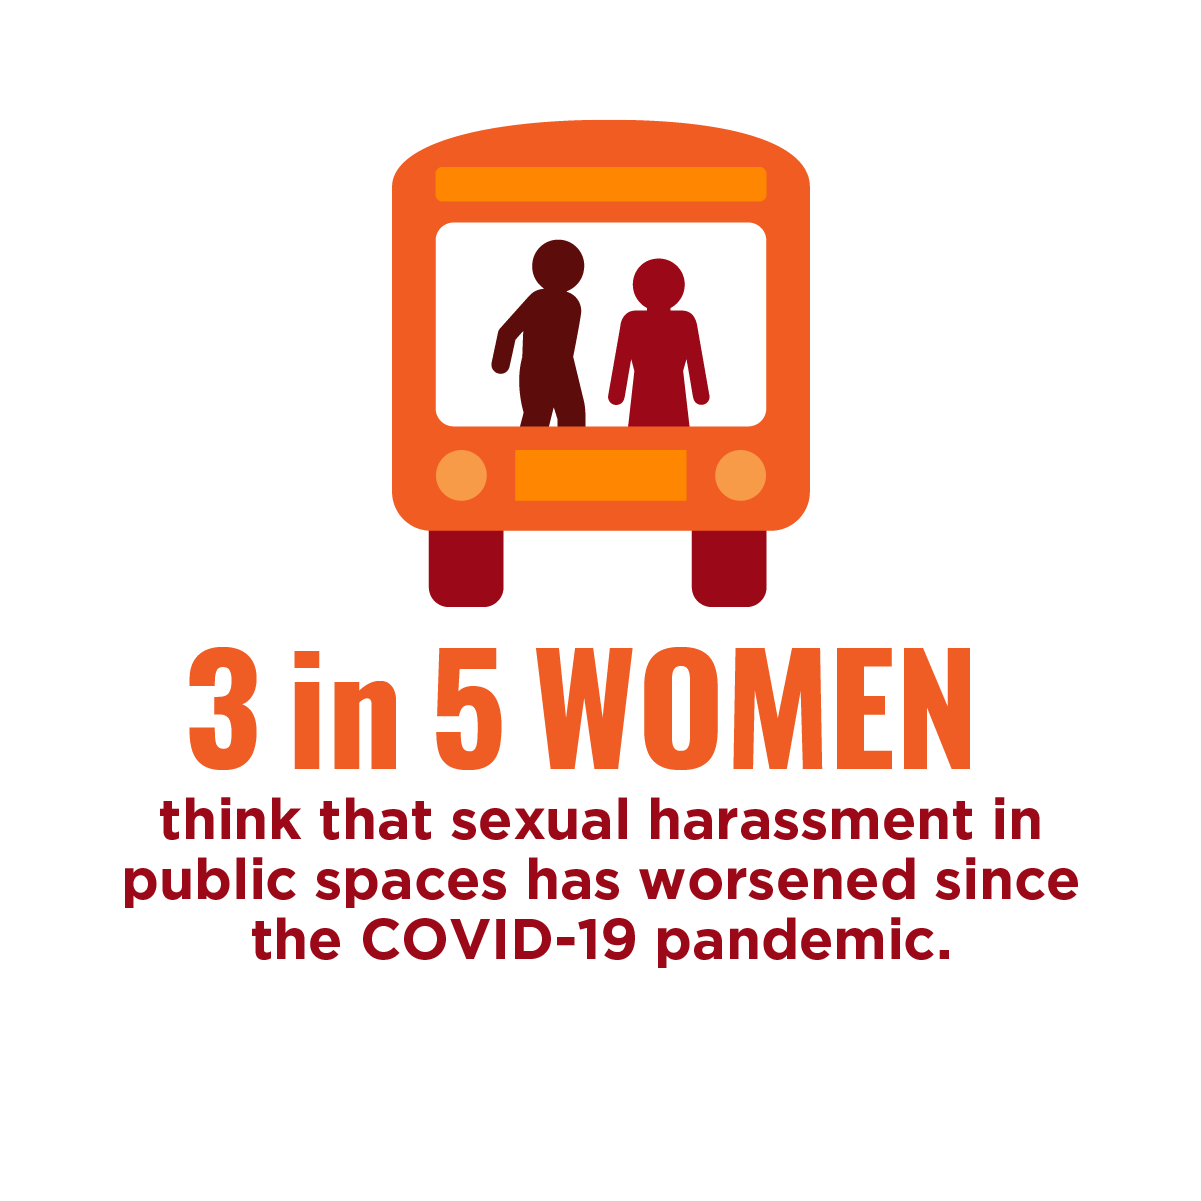 3 in 5 women think that sexual harassment in public spaces has worsened during COVID-19.